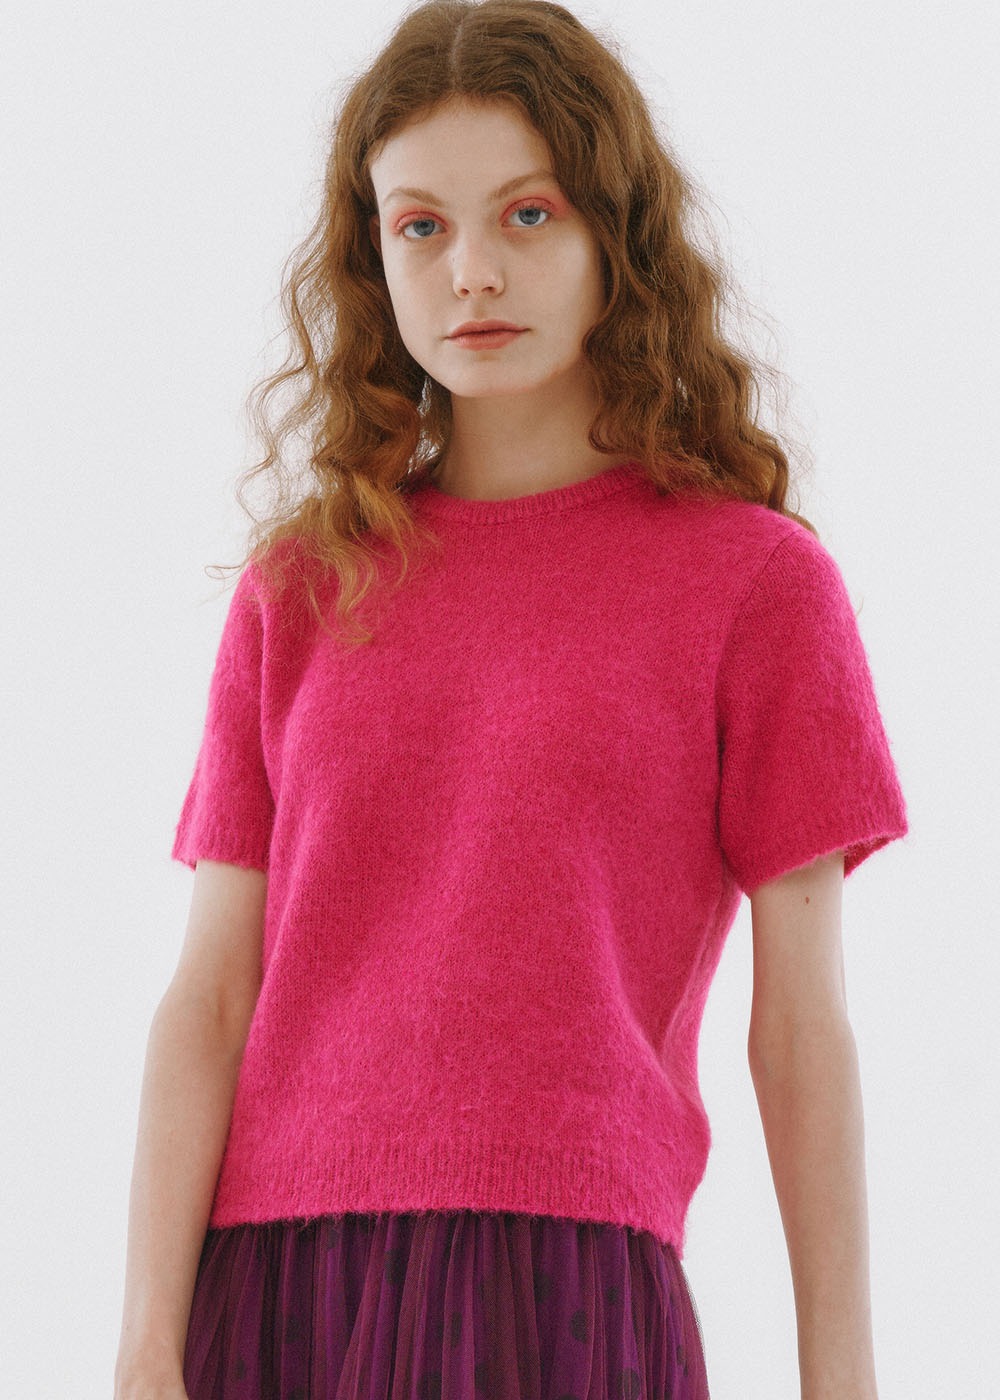 *Mohair Fuzzy Knit Top [TURE PINK]*Mohair Fuzzy Knit Top [TURE PINK]로씨로씨